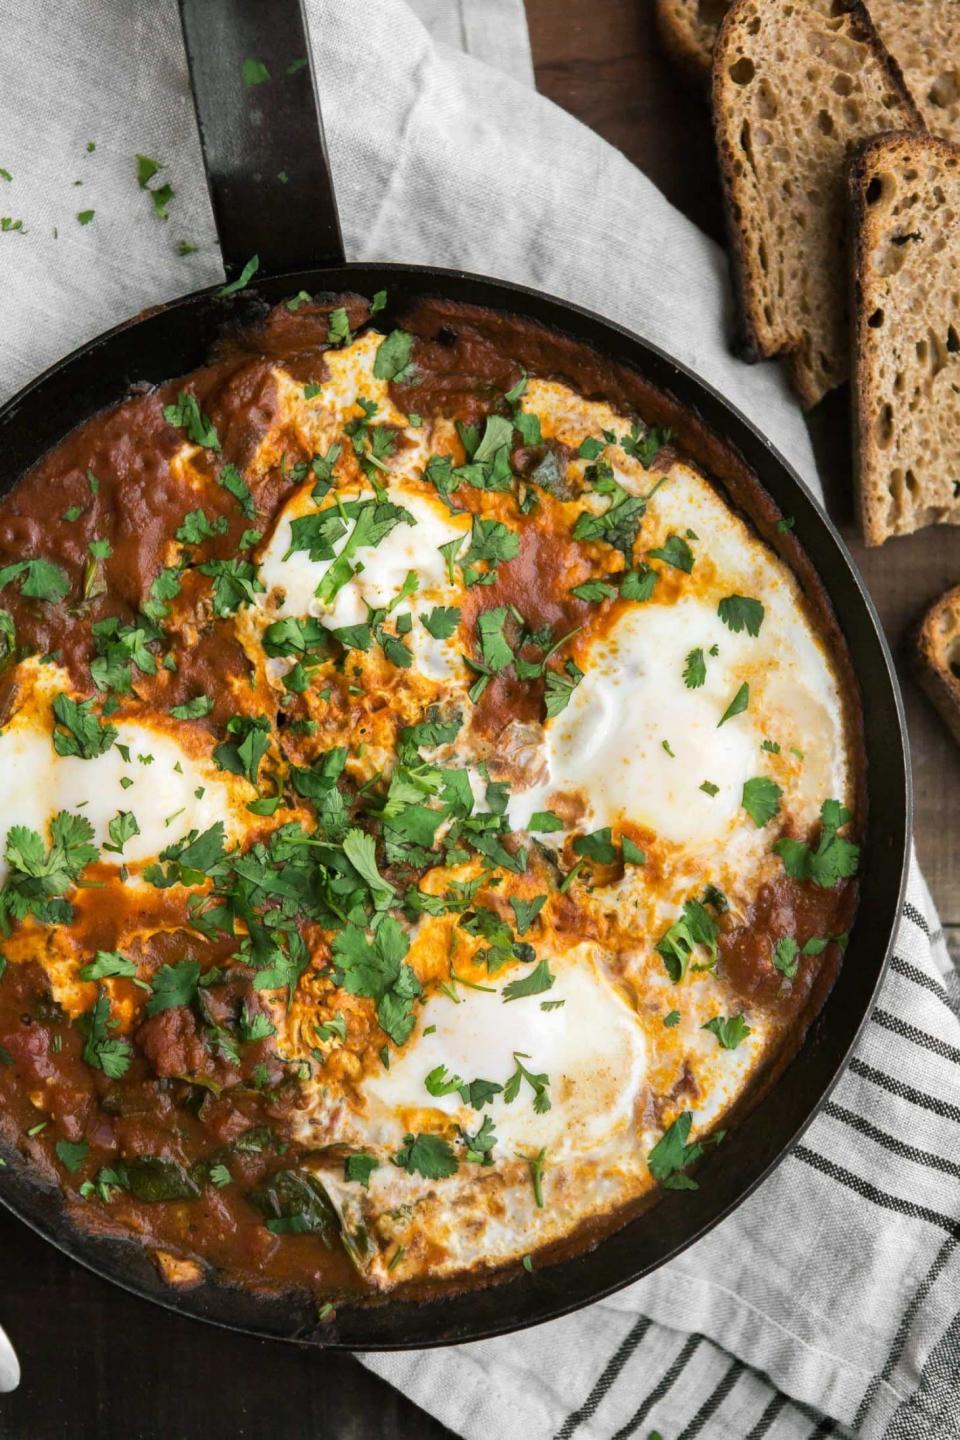 <strong>Get the <a href="https://naturallyella.com/curried-eggs-spinach/" target="_blank">Curried Eggs with Spinach recipe</a>&nbsp;from Naturally Ella</strong>